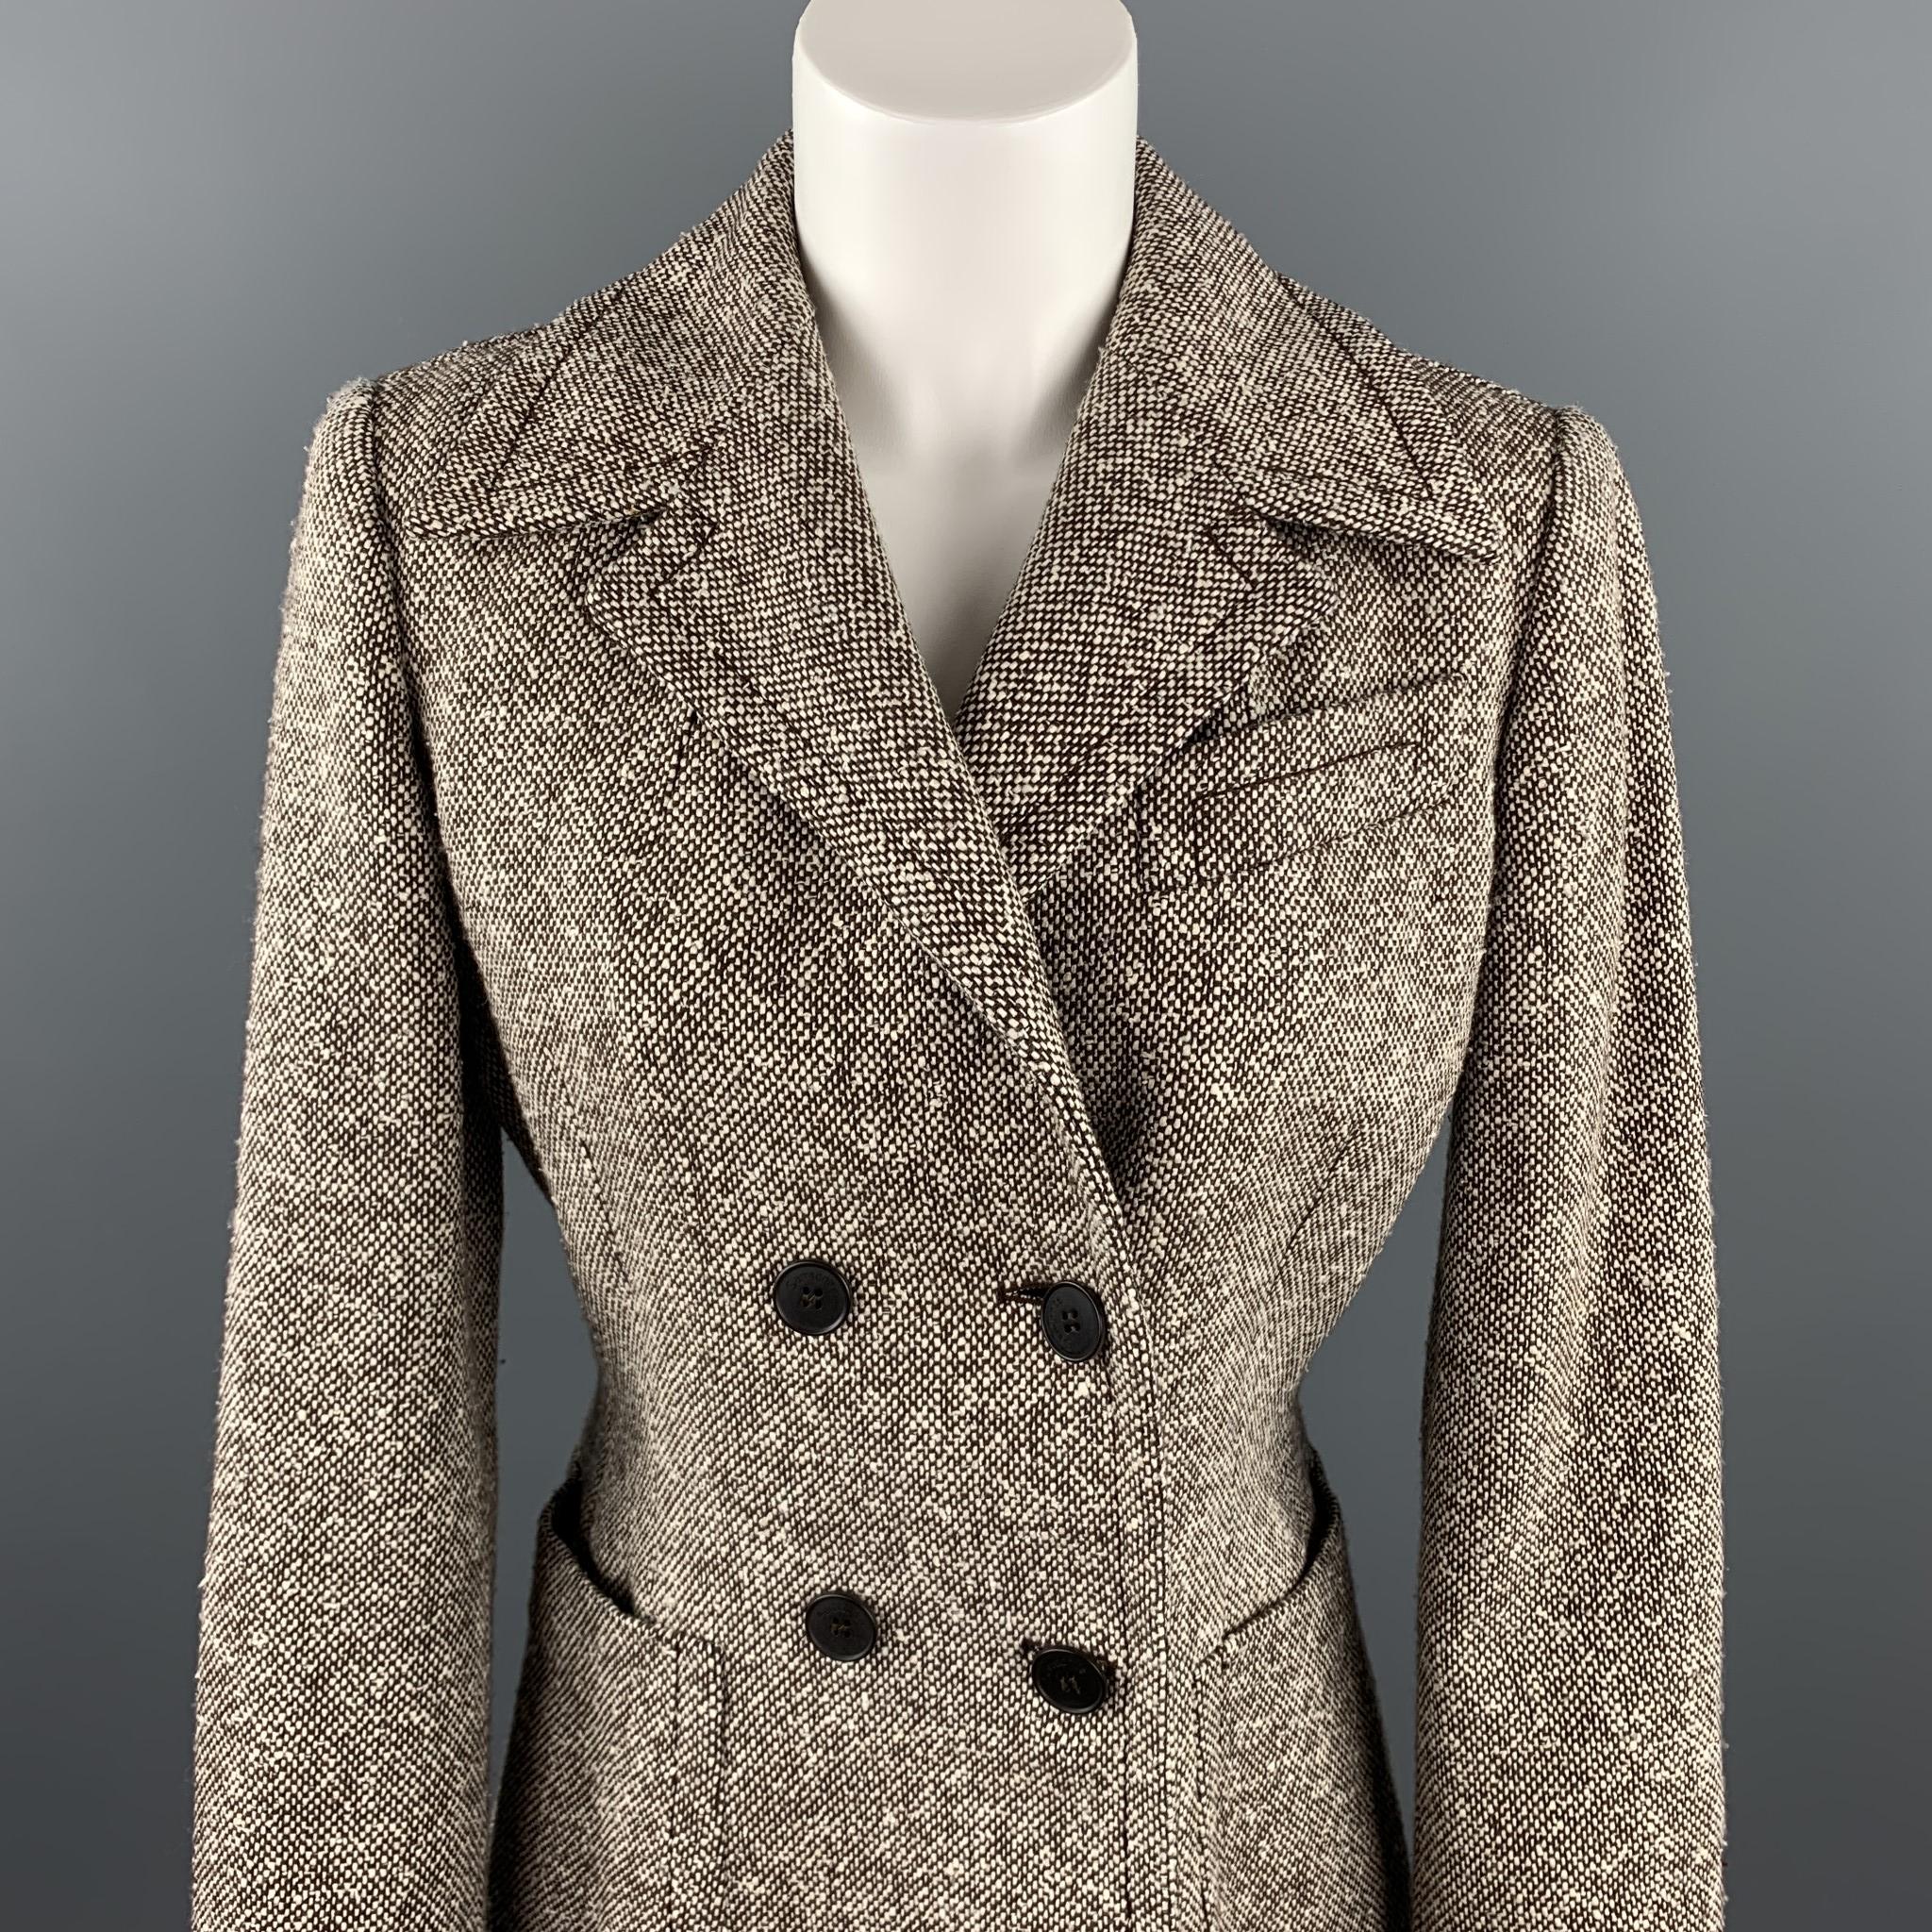 SAMSONITE jacket comes in brown / white tweed wool blend with a full liner featuring a peak lapel, patch pockets, and a double breasted closure. Made in Italy. 

Excellent Pre-Owned Condition.
Marked: 8

Measurements:

Shoulder: 16 in. 
Bust: 38 in.